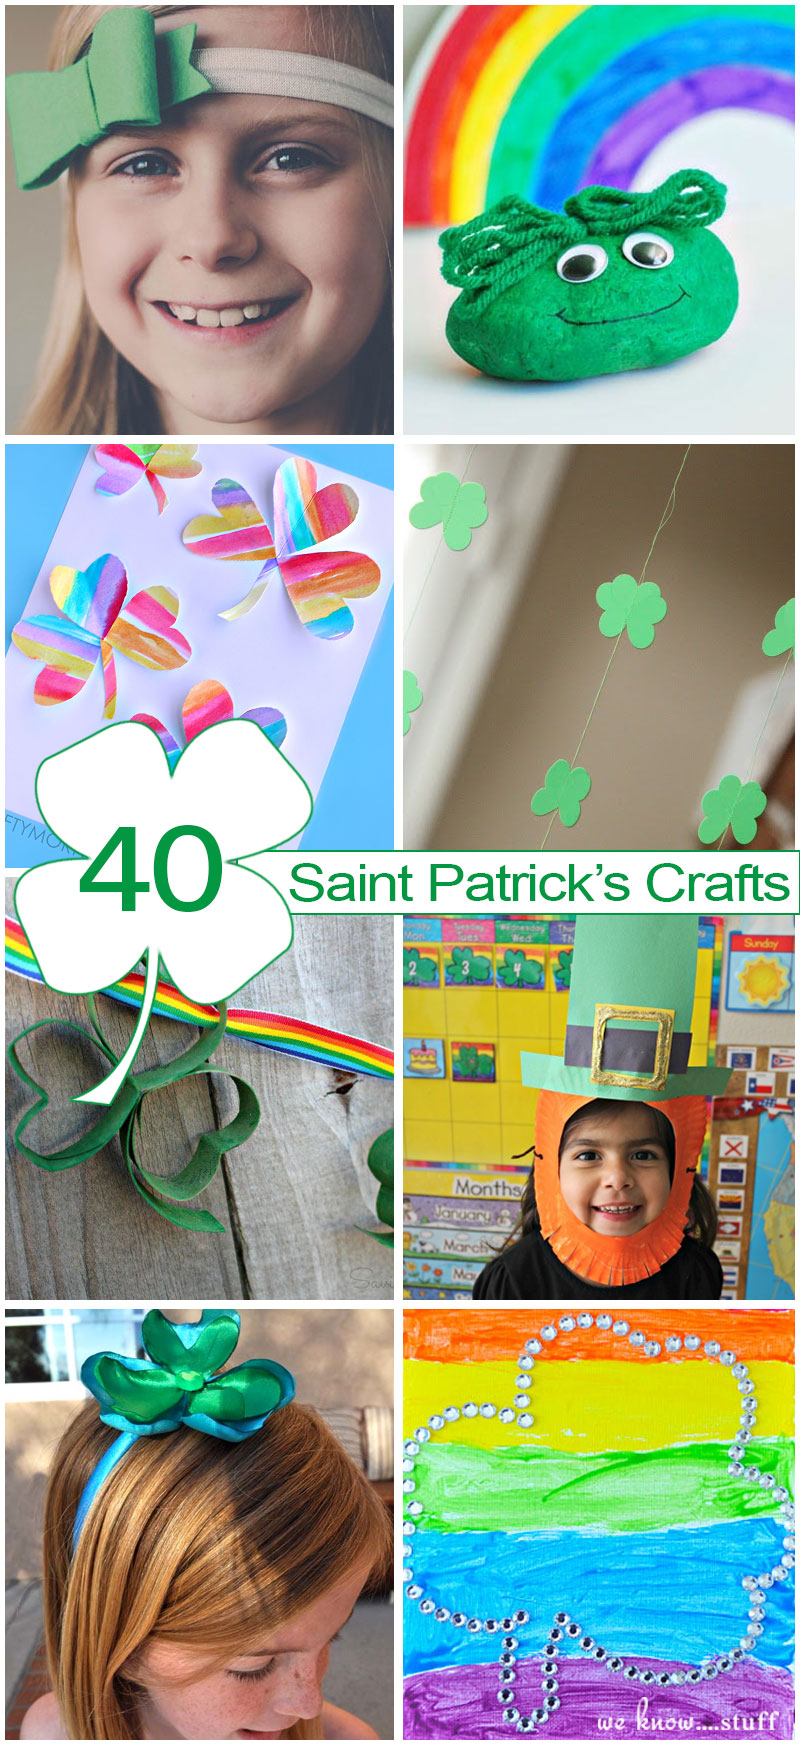 We get just as revved up for Saint Patrick's Day as we do for the other Holidays, so we've compiled 40 Saint Patrick's Day Crafts For Kids to celebrate!